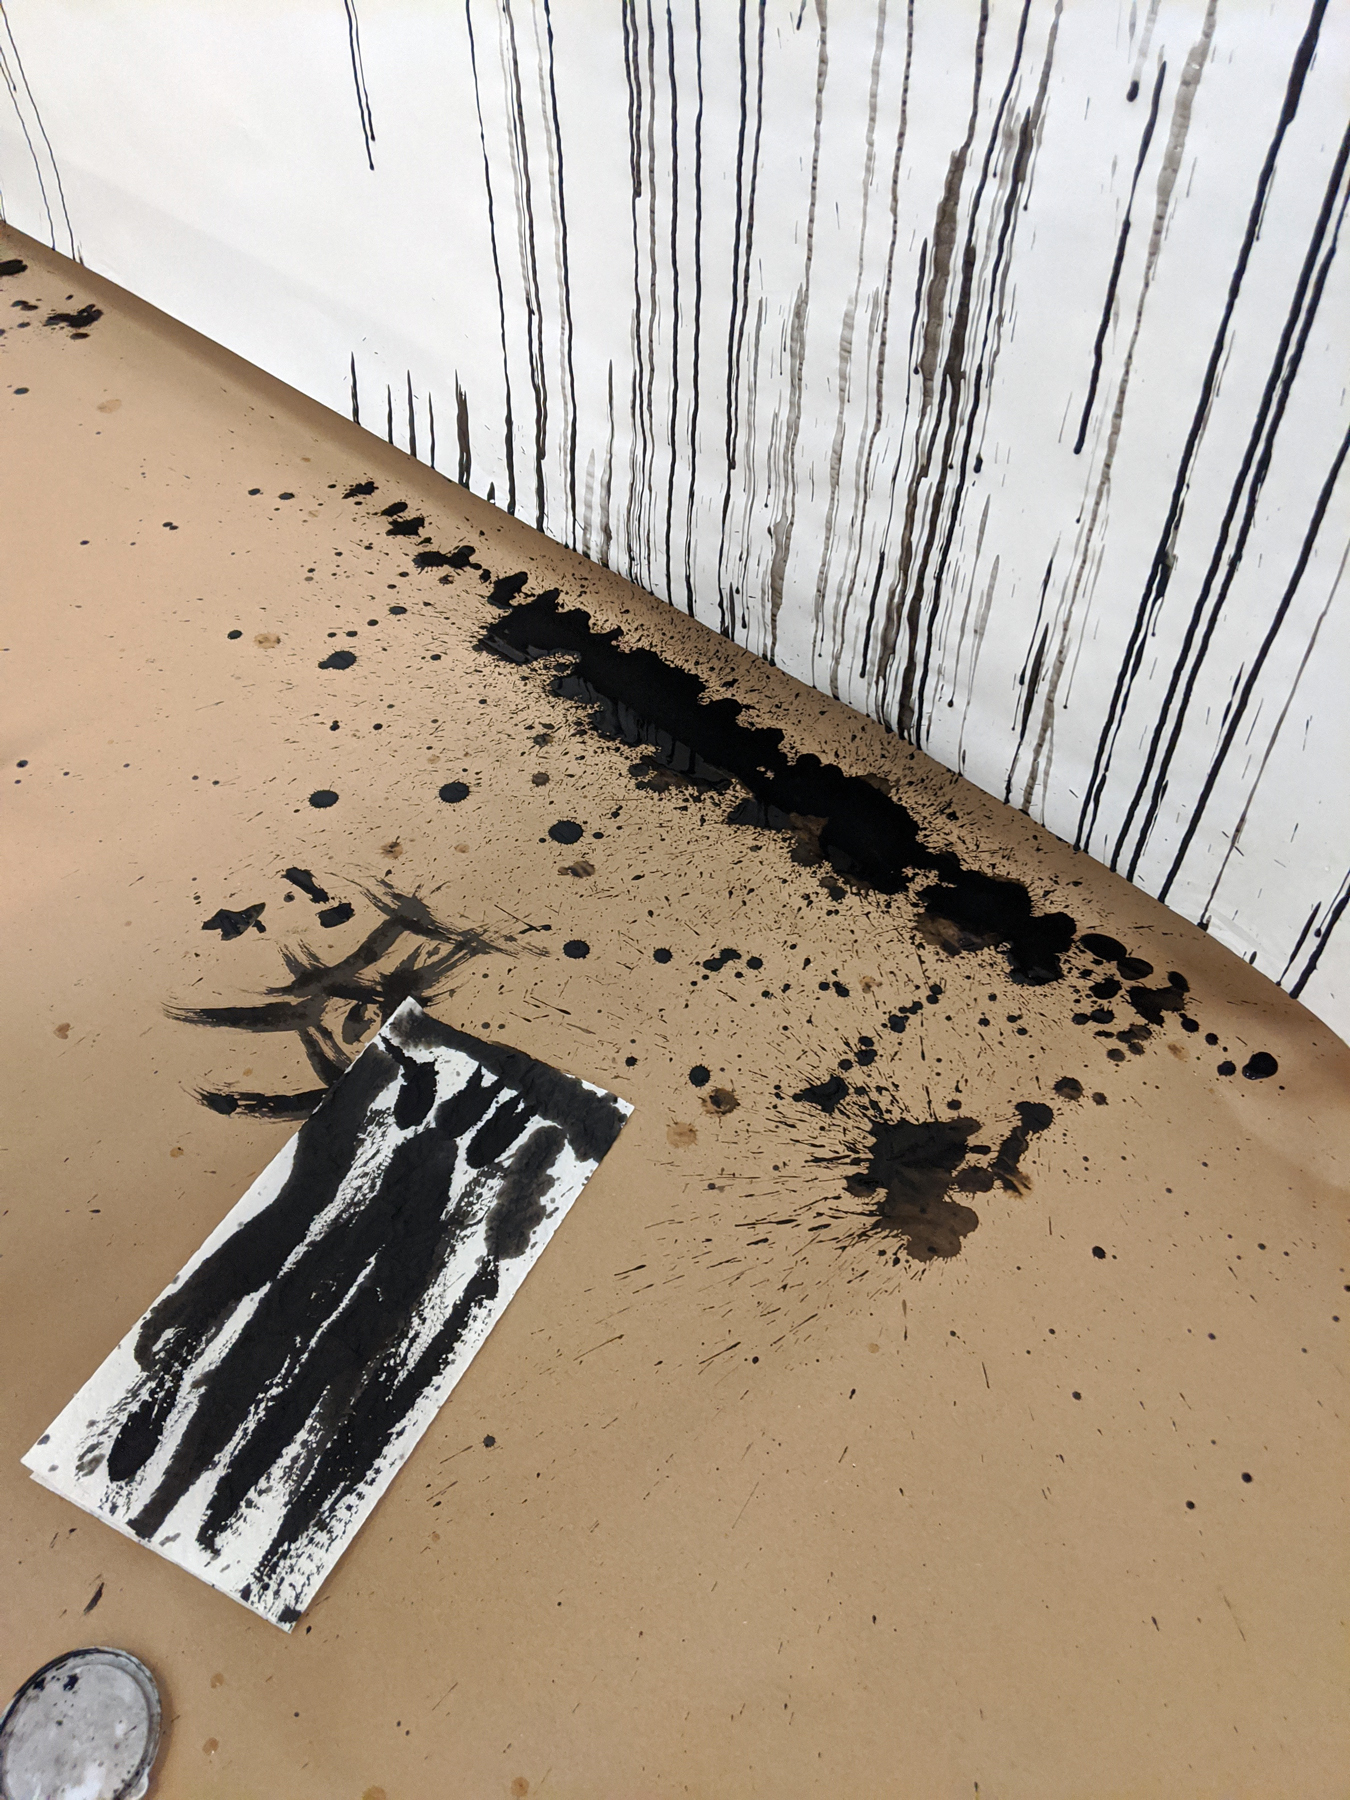 Rapid Fire Text: ink dripping down the canvas